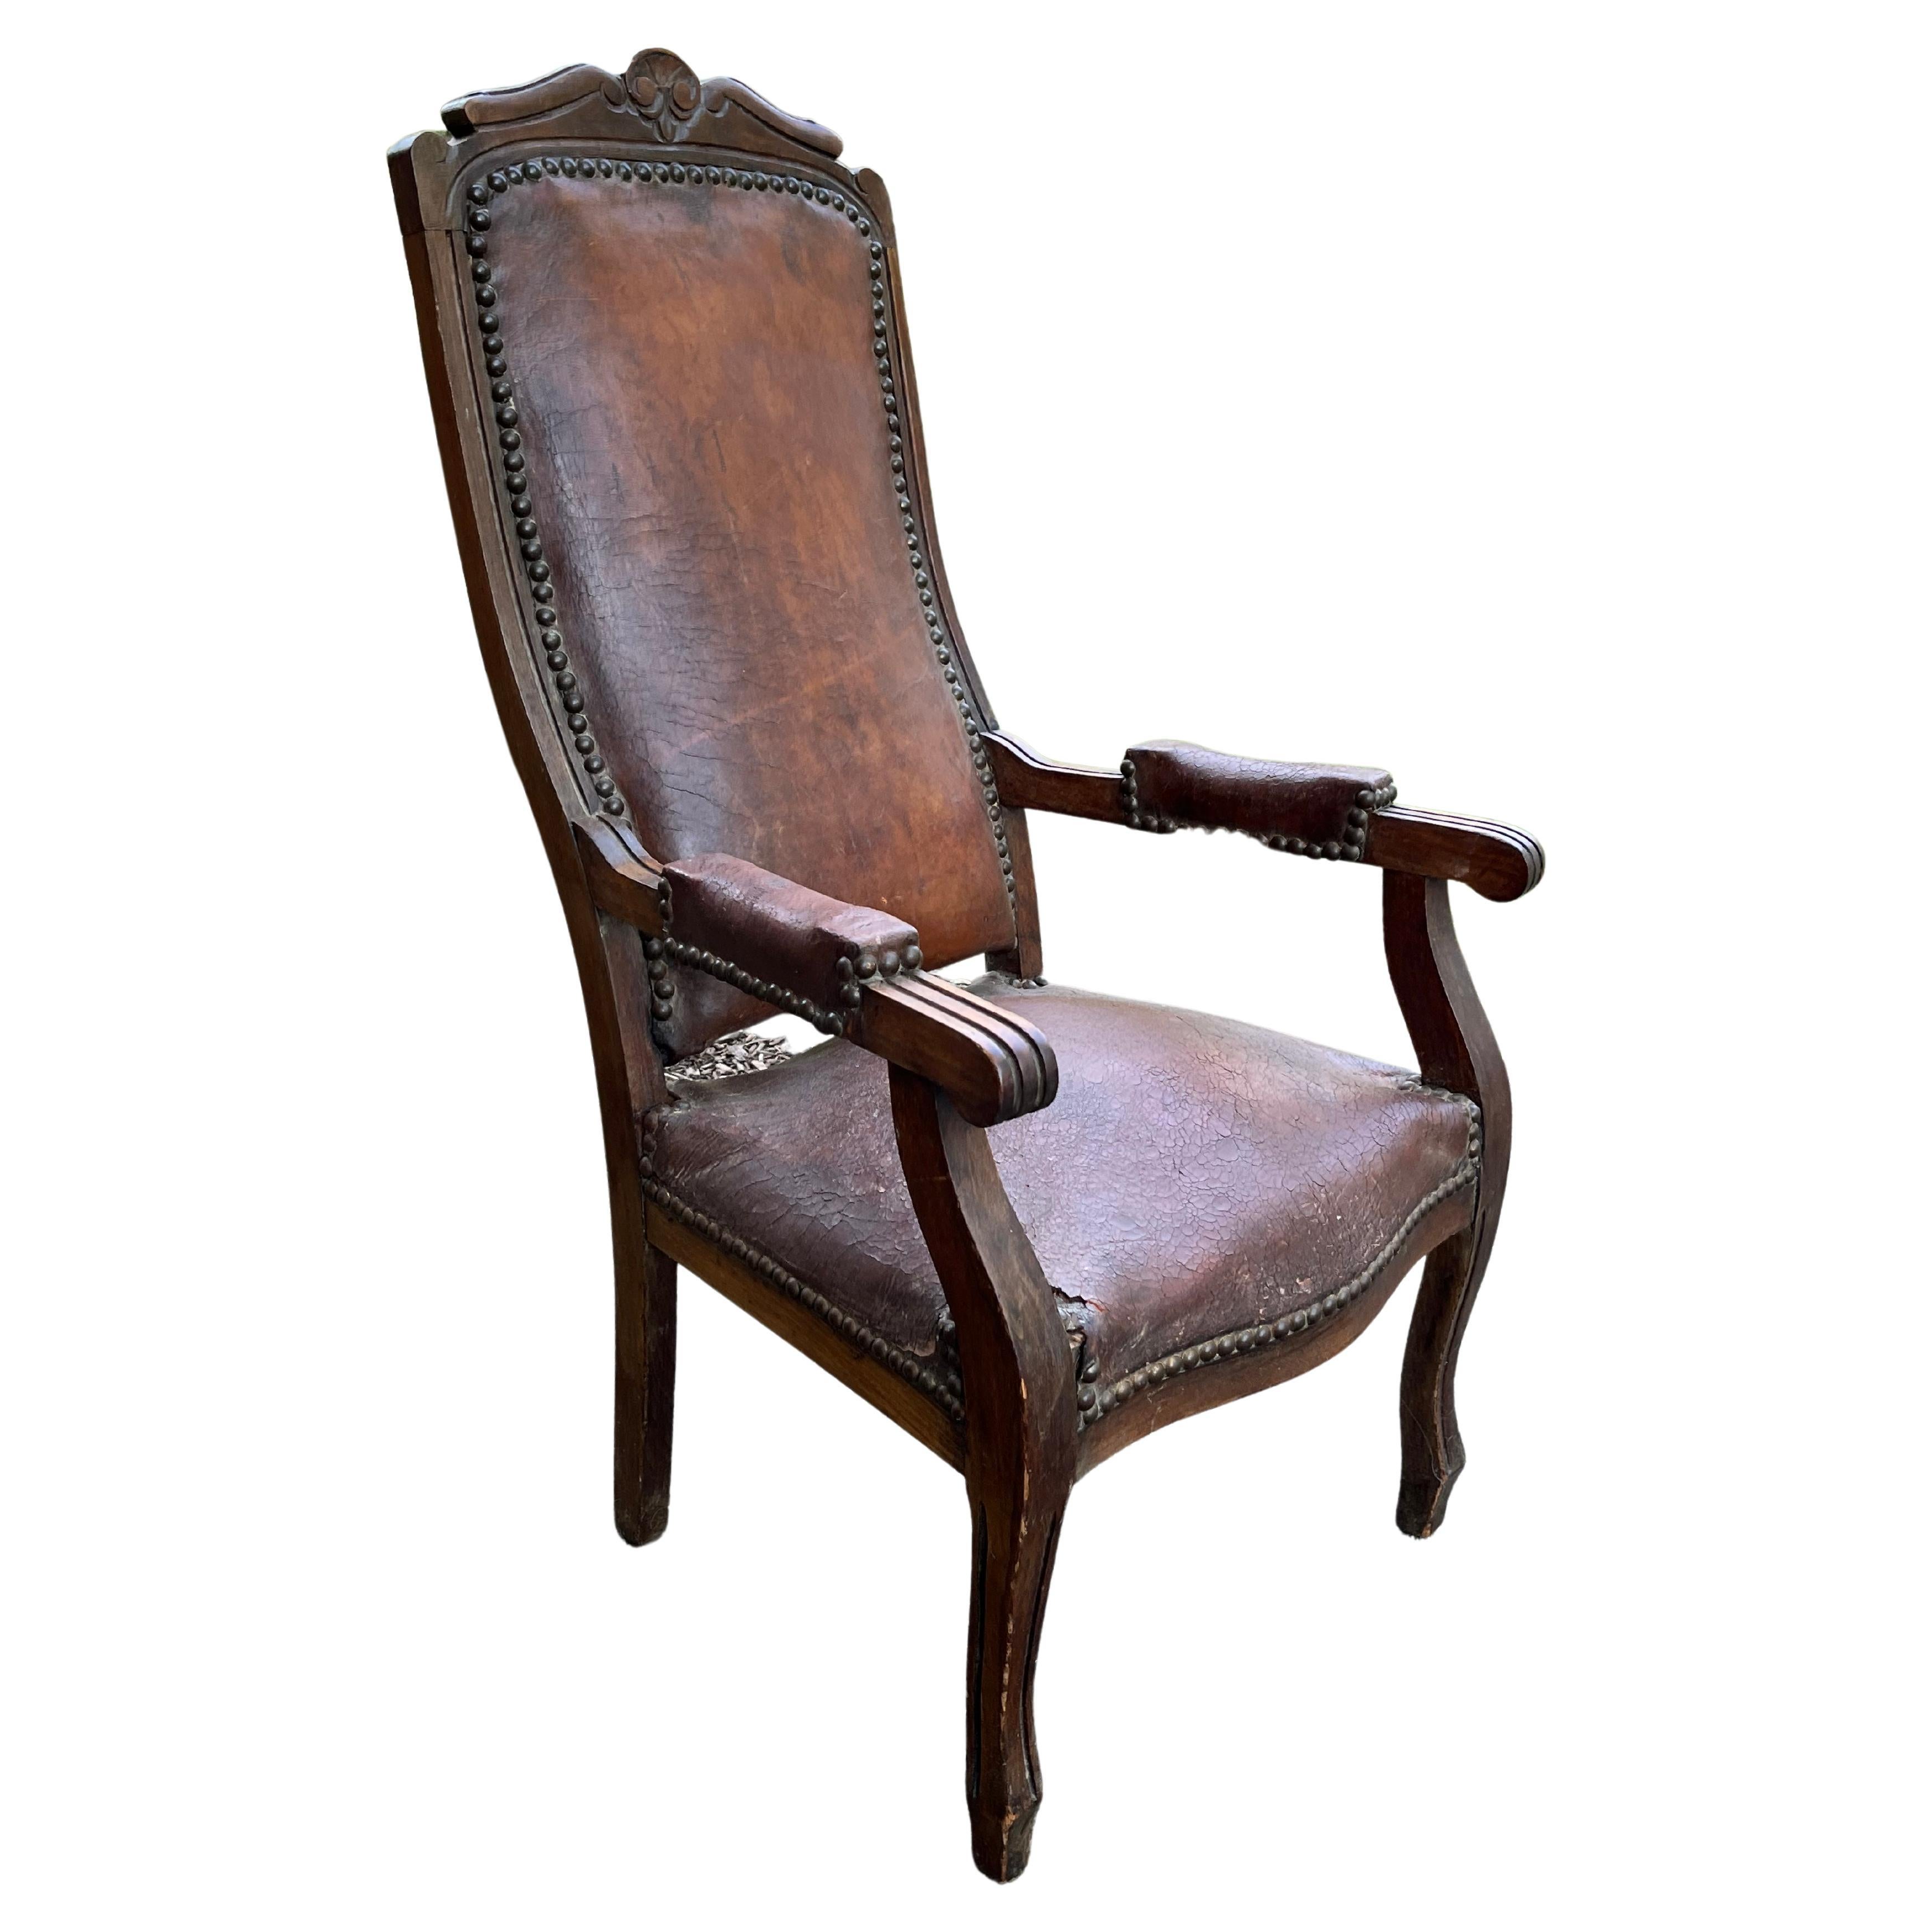 Child’s Size “Voltaire” Chair, 19th Century French For Sale